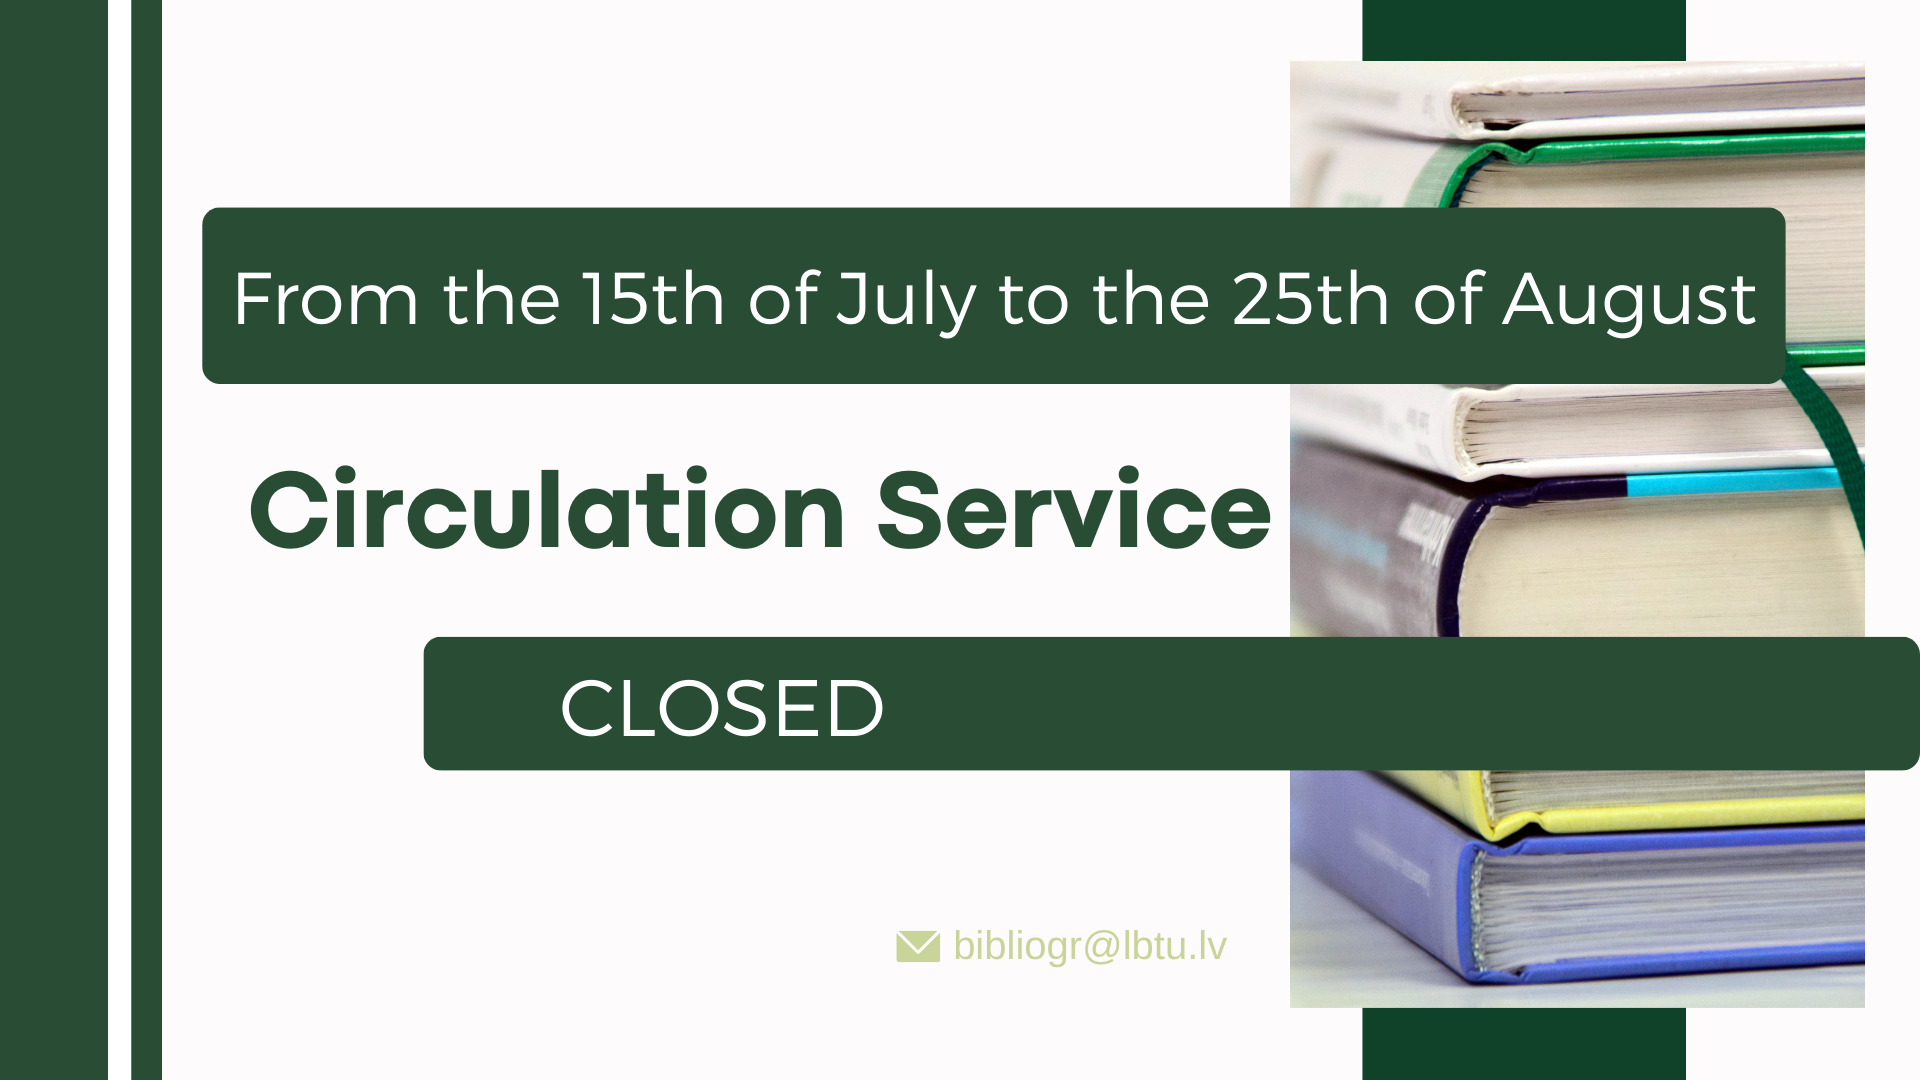 During the student holidays to August 25, the library is open for readers until 17.00. Circulation Service and Textbook Lending are closed.